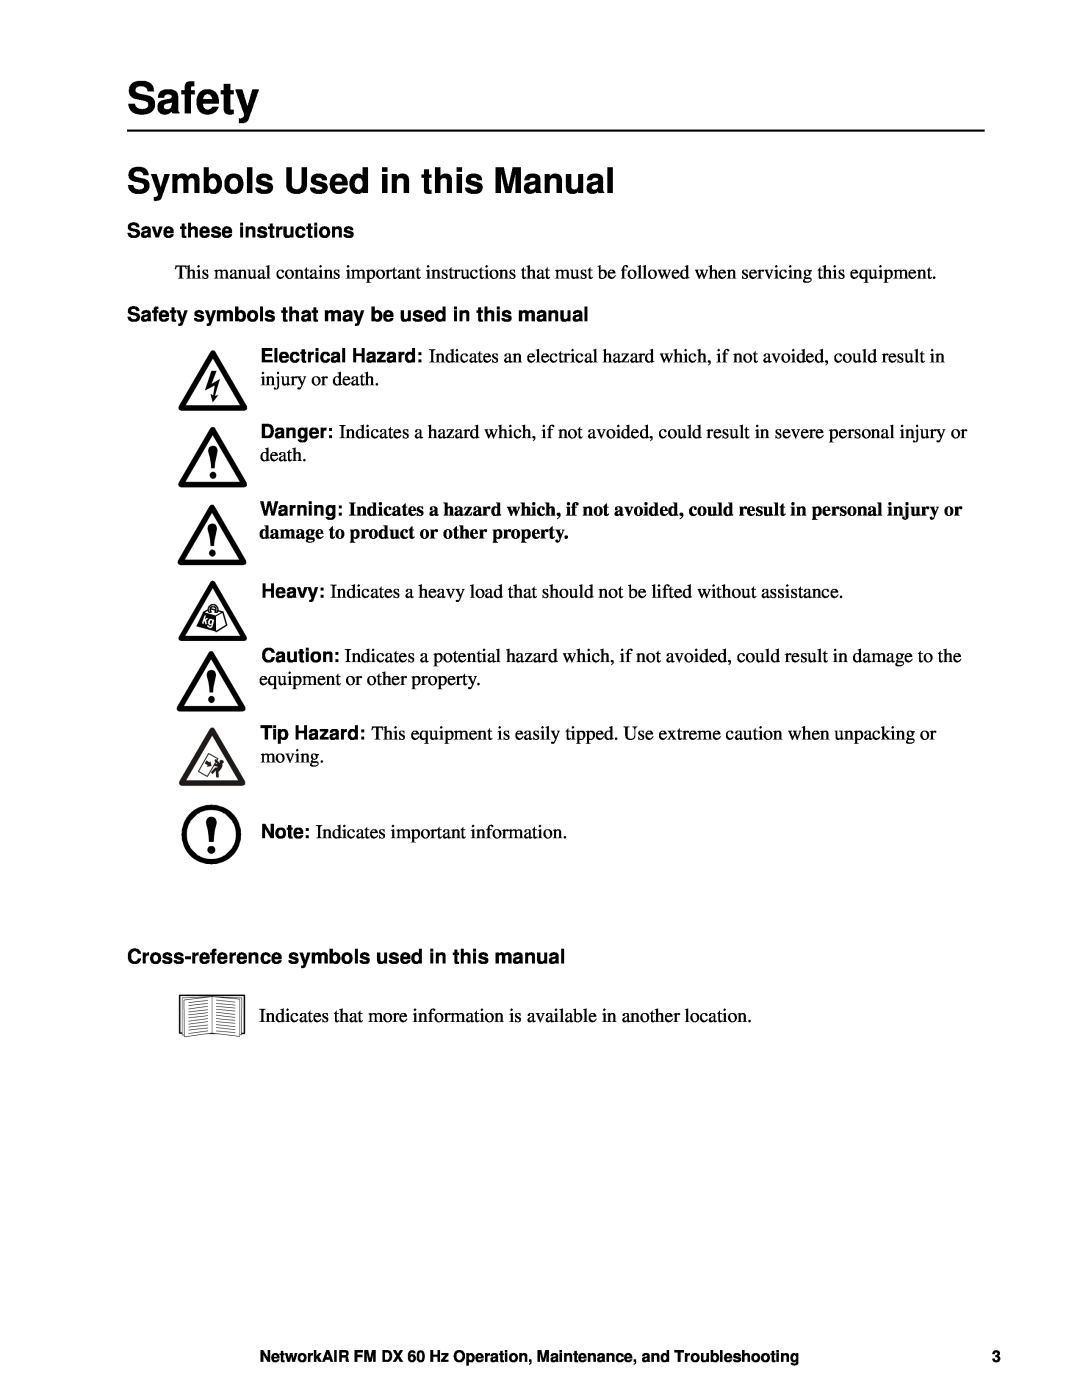 American Power Conversion FM, DX manual Safety, Symbols Used in this Manual, Save these instructions 